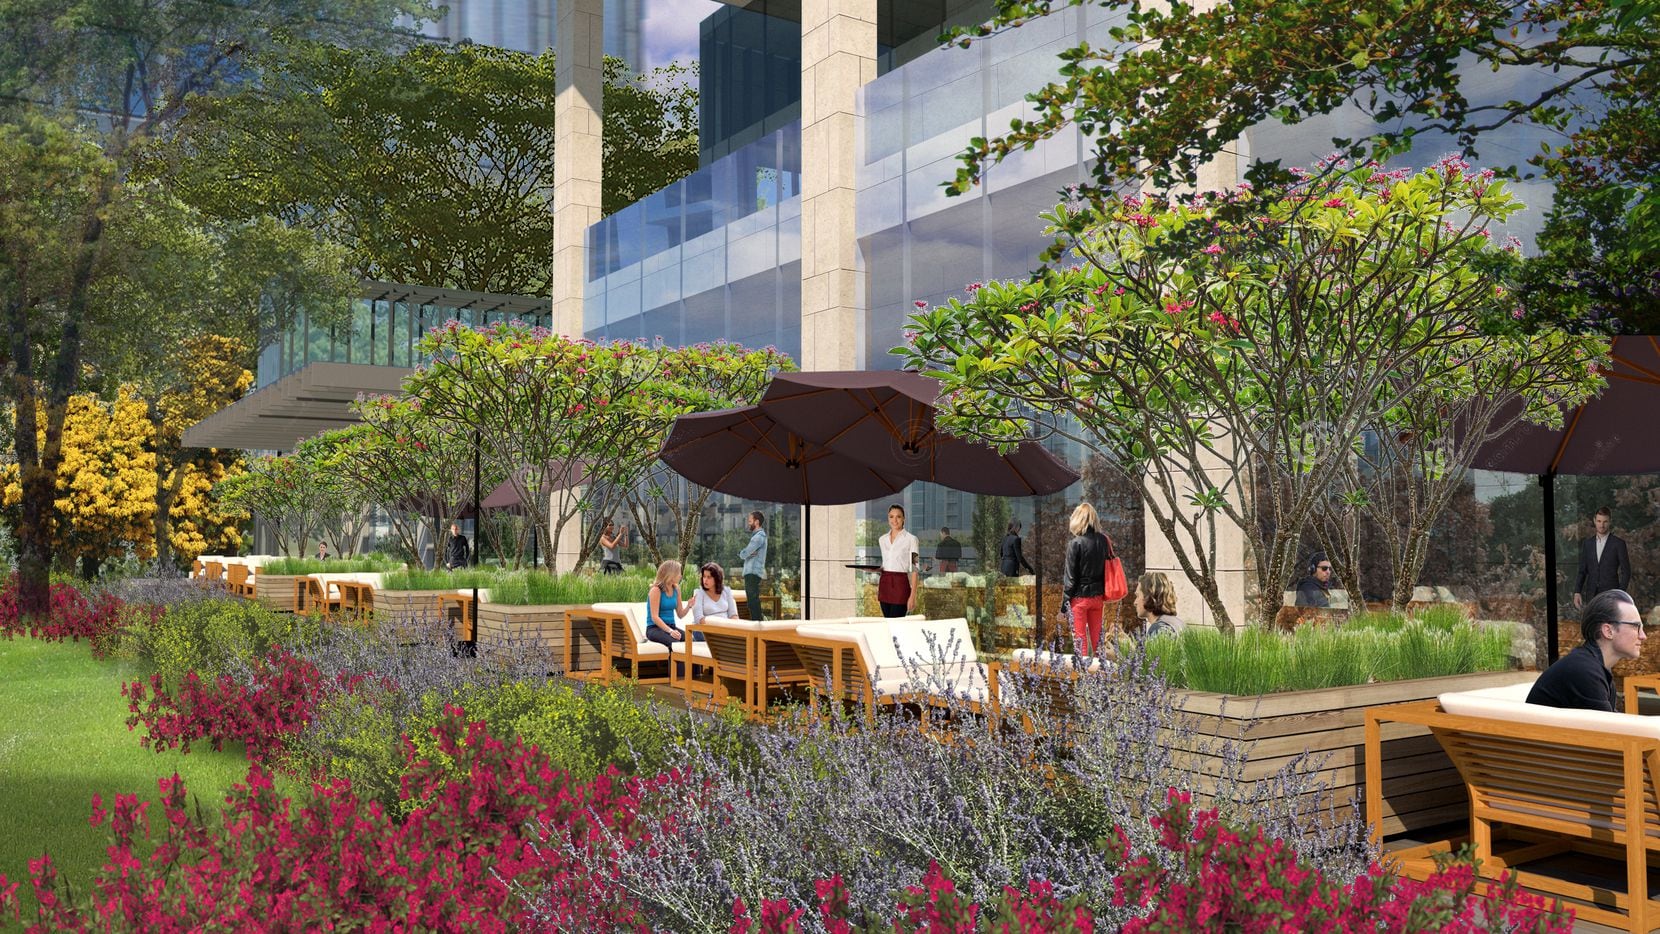 A groundfloor restaurant with outdoor seating is planned on the half-acre lawn out front.